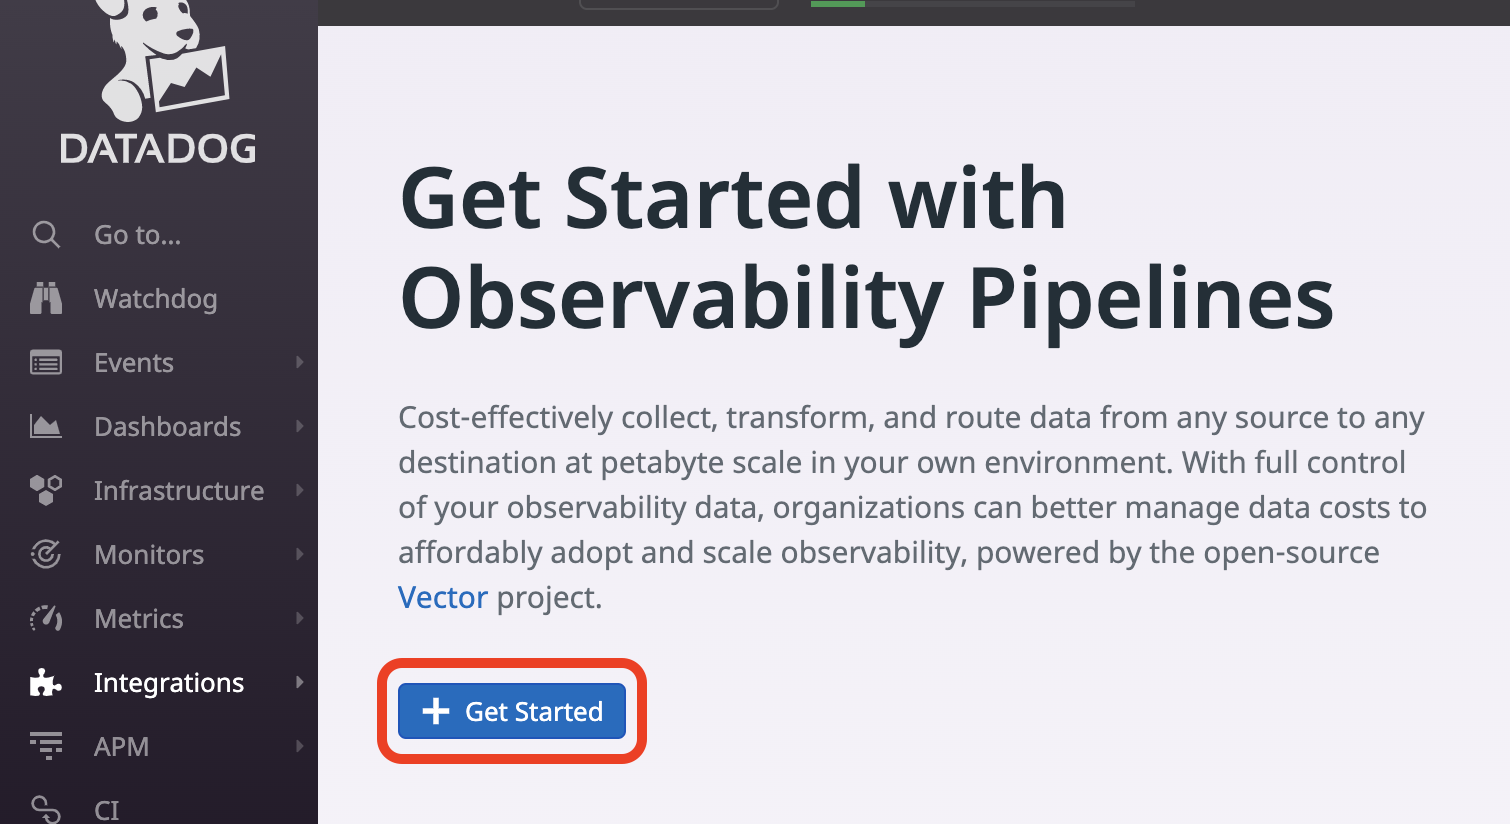 Press the button to Get Started with Observability Pipelines